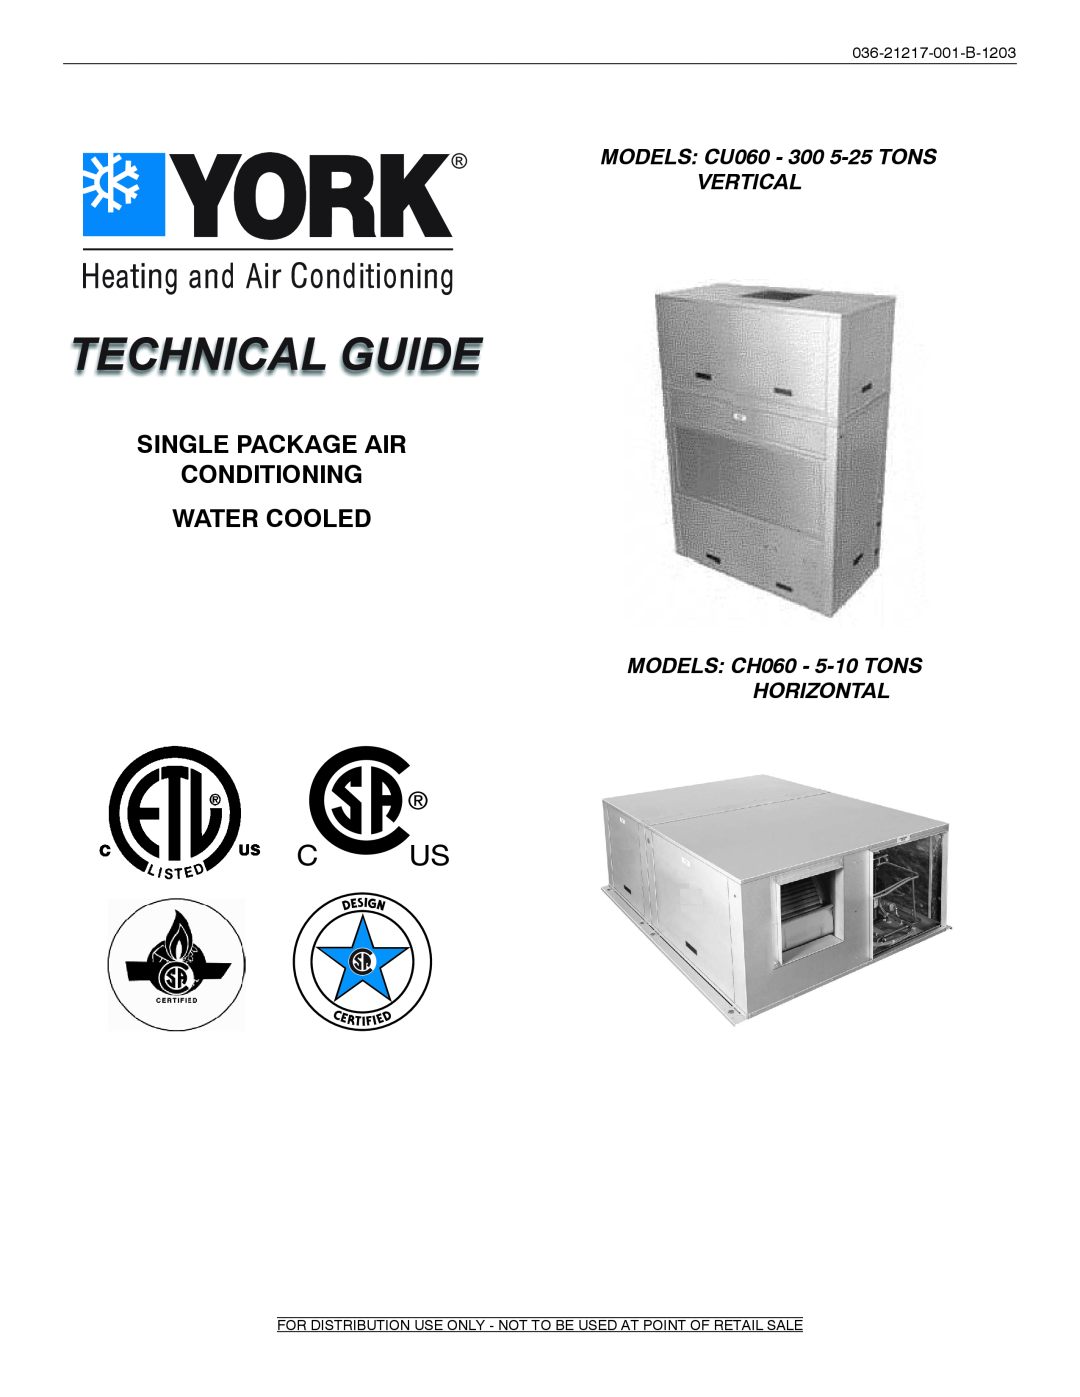 York CH060 manual Single Package Air Conditioning Water Cooled, MODELS: CU060 - 300 5-25TONS VERTICAL 